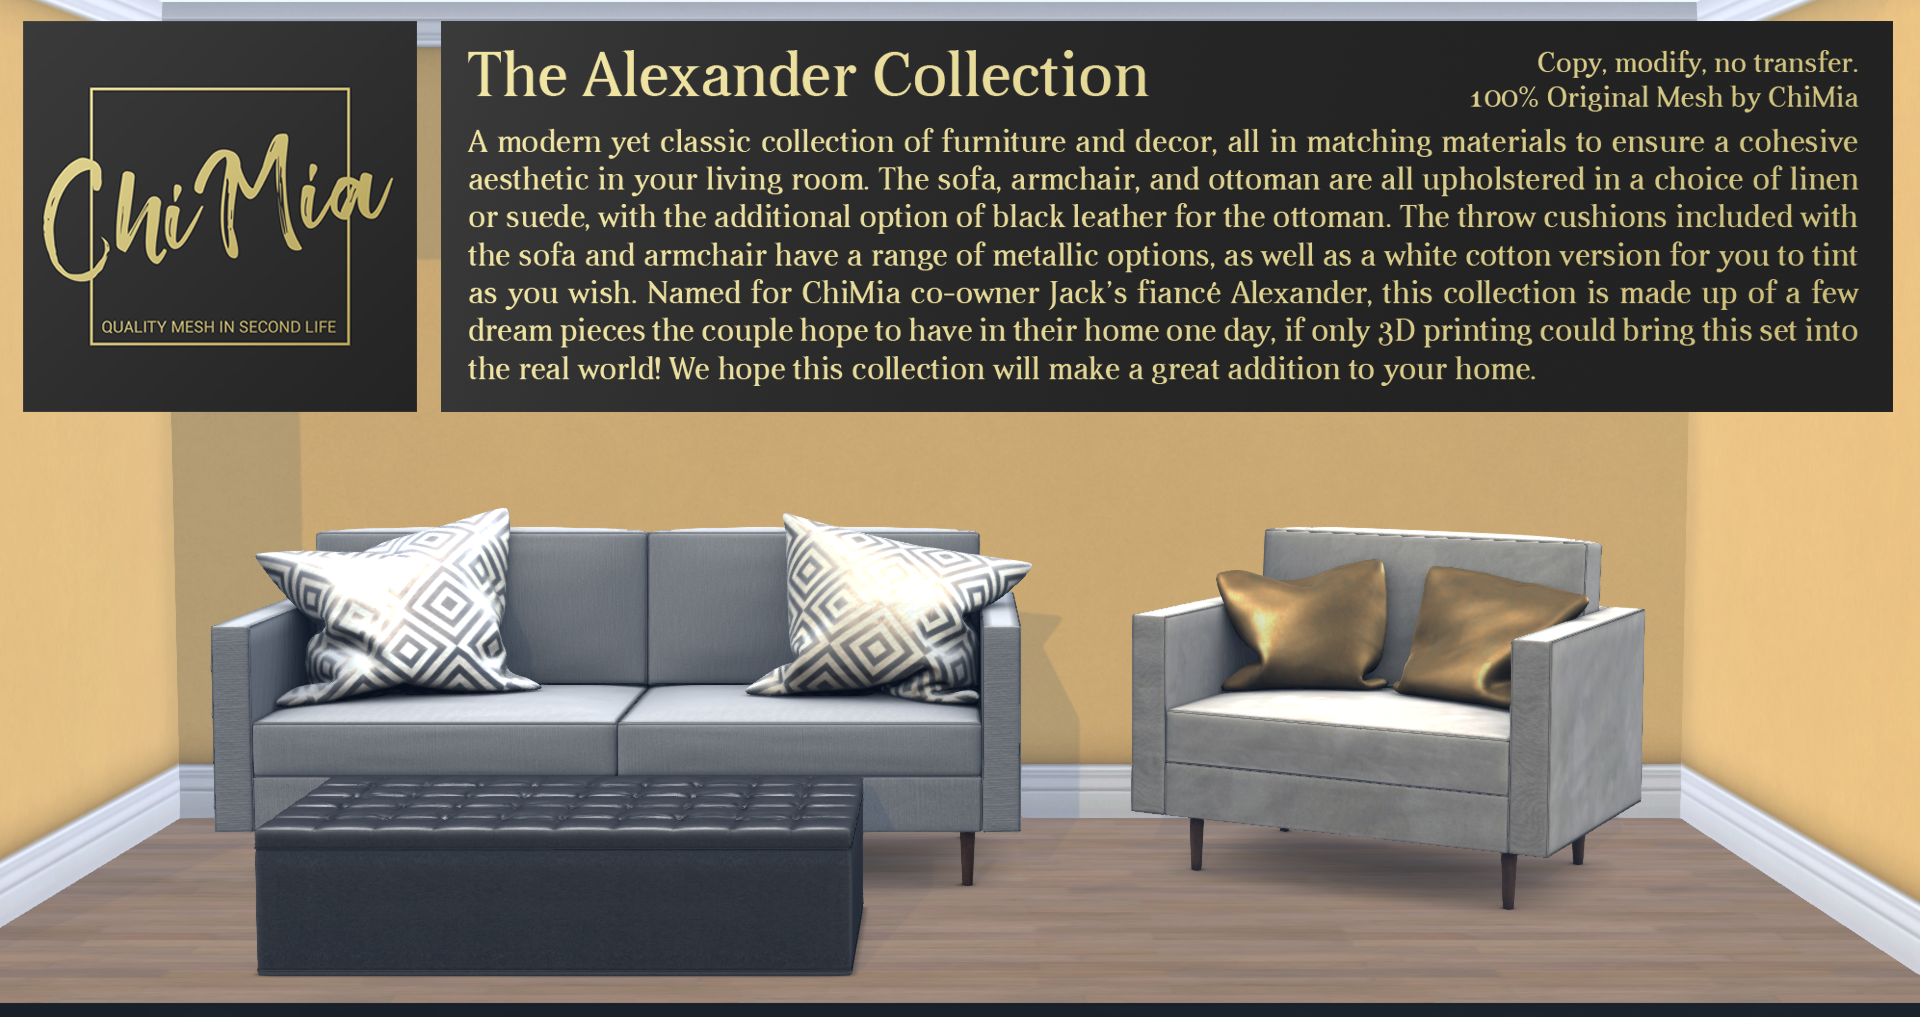 The Alexander Collection